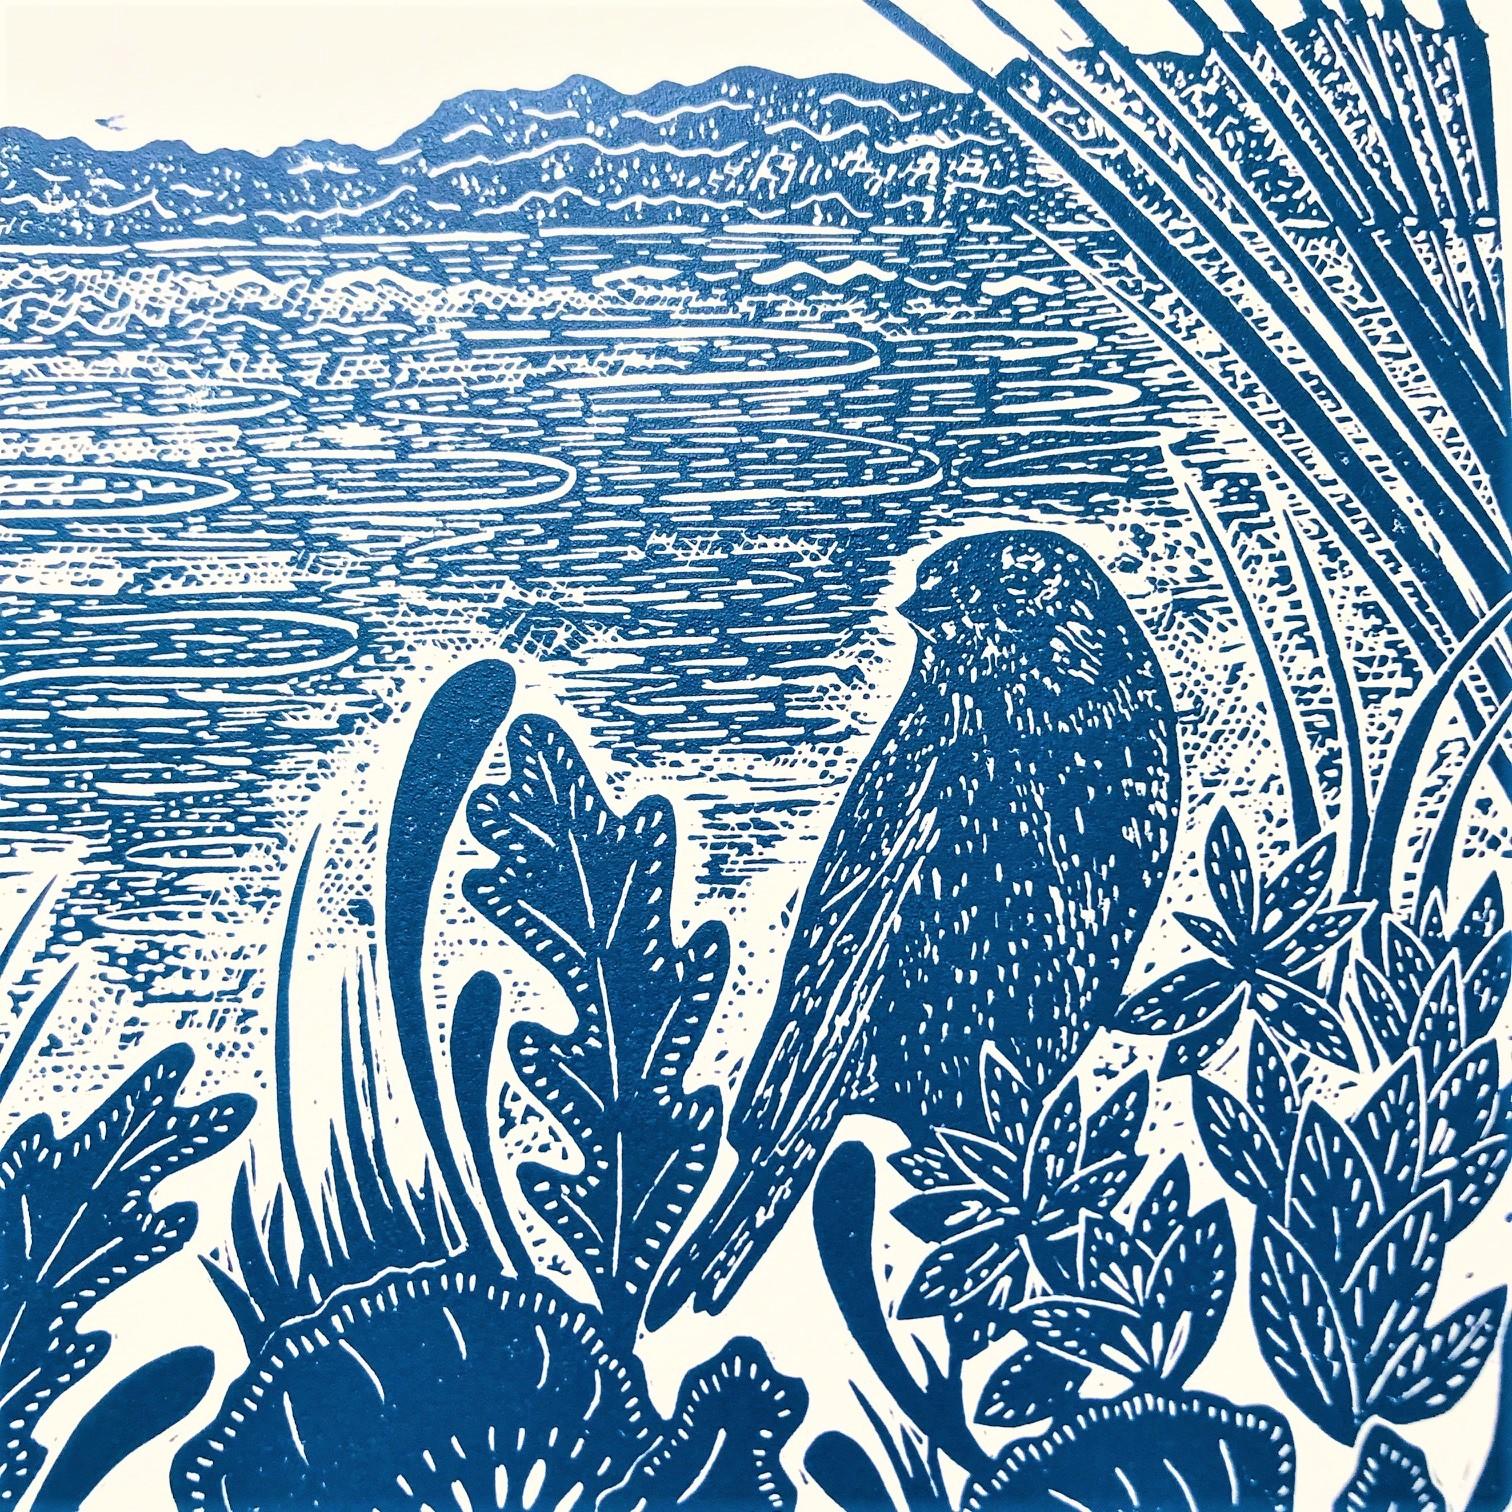 Sea Poppies and Linnets at Salthouse with Linocut, Print by Joanna Padfield For Sale 2